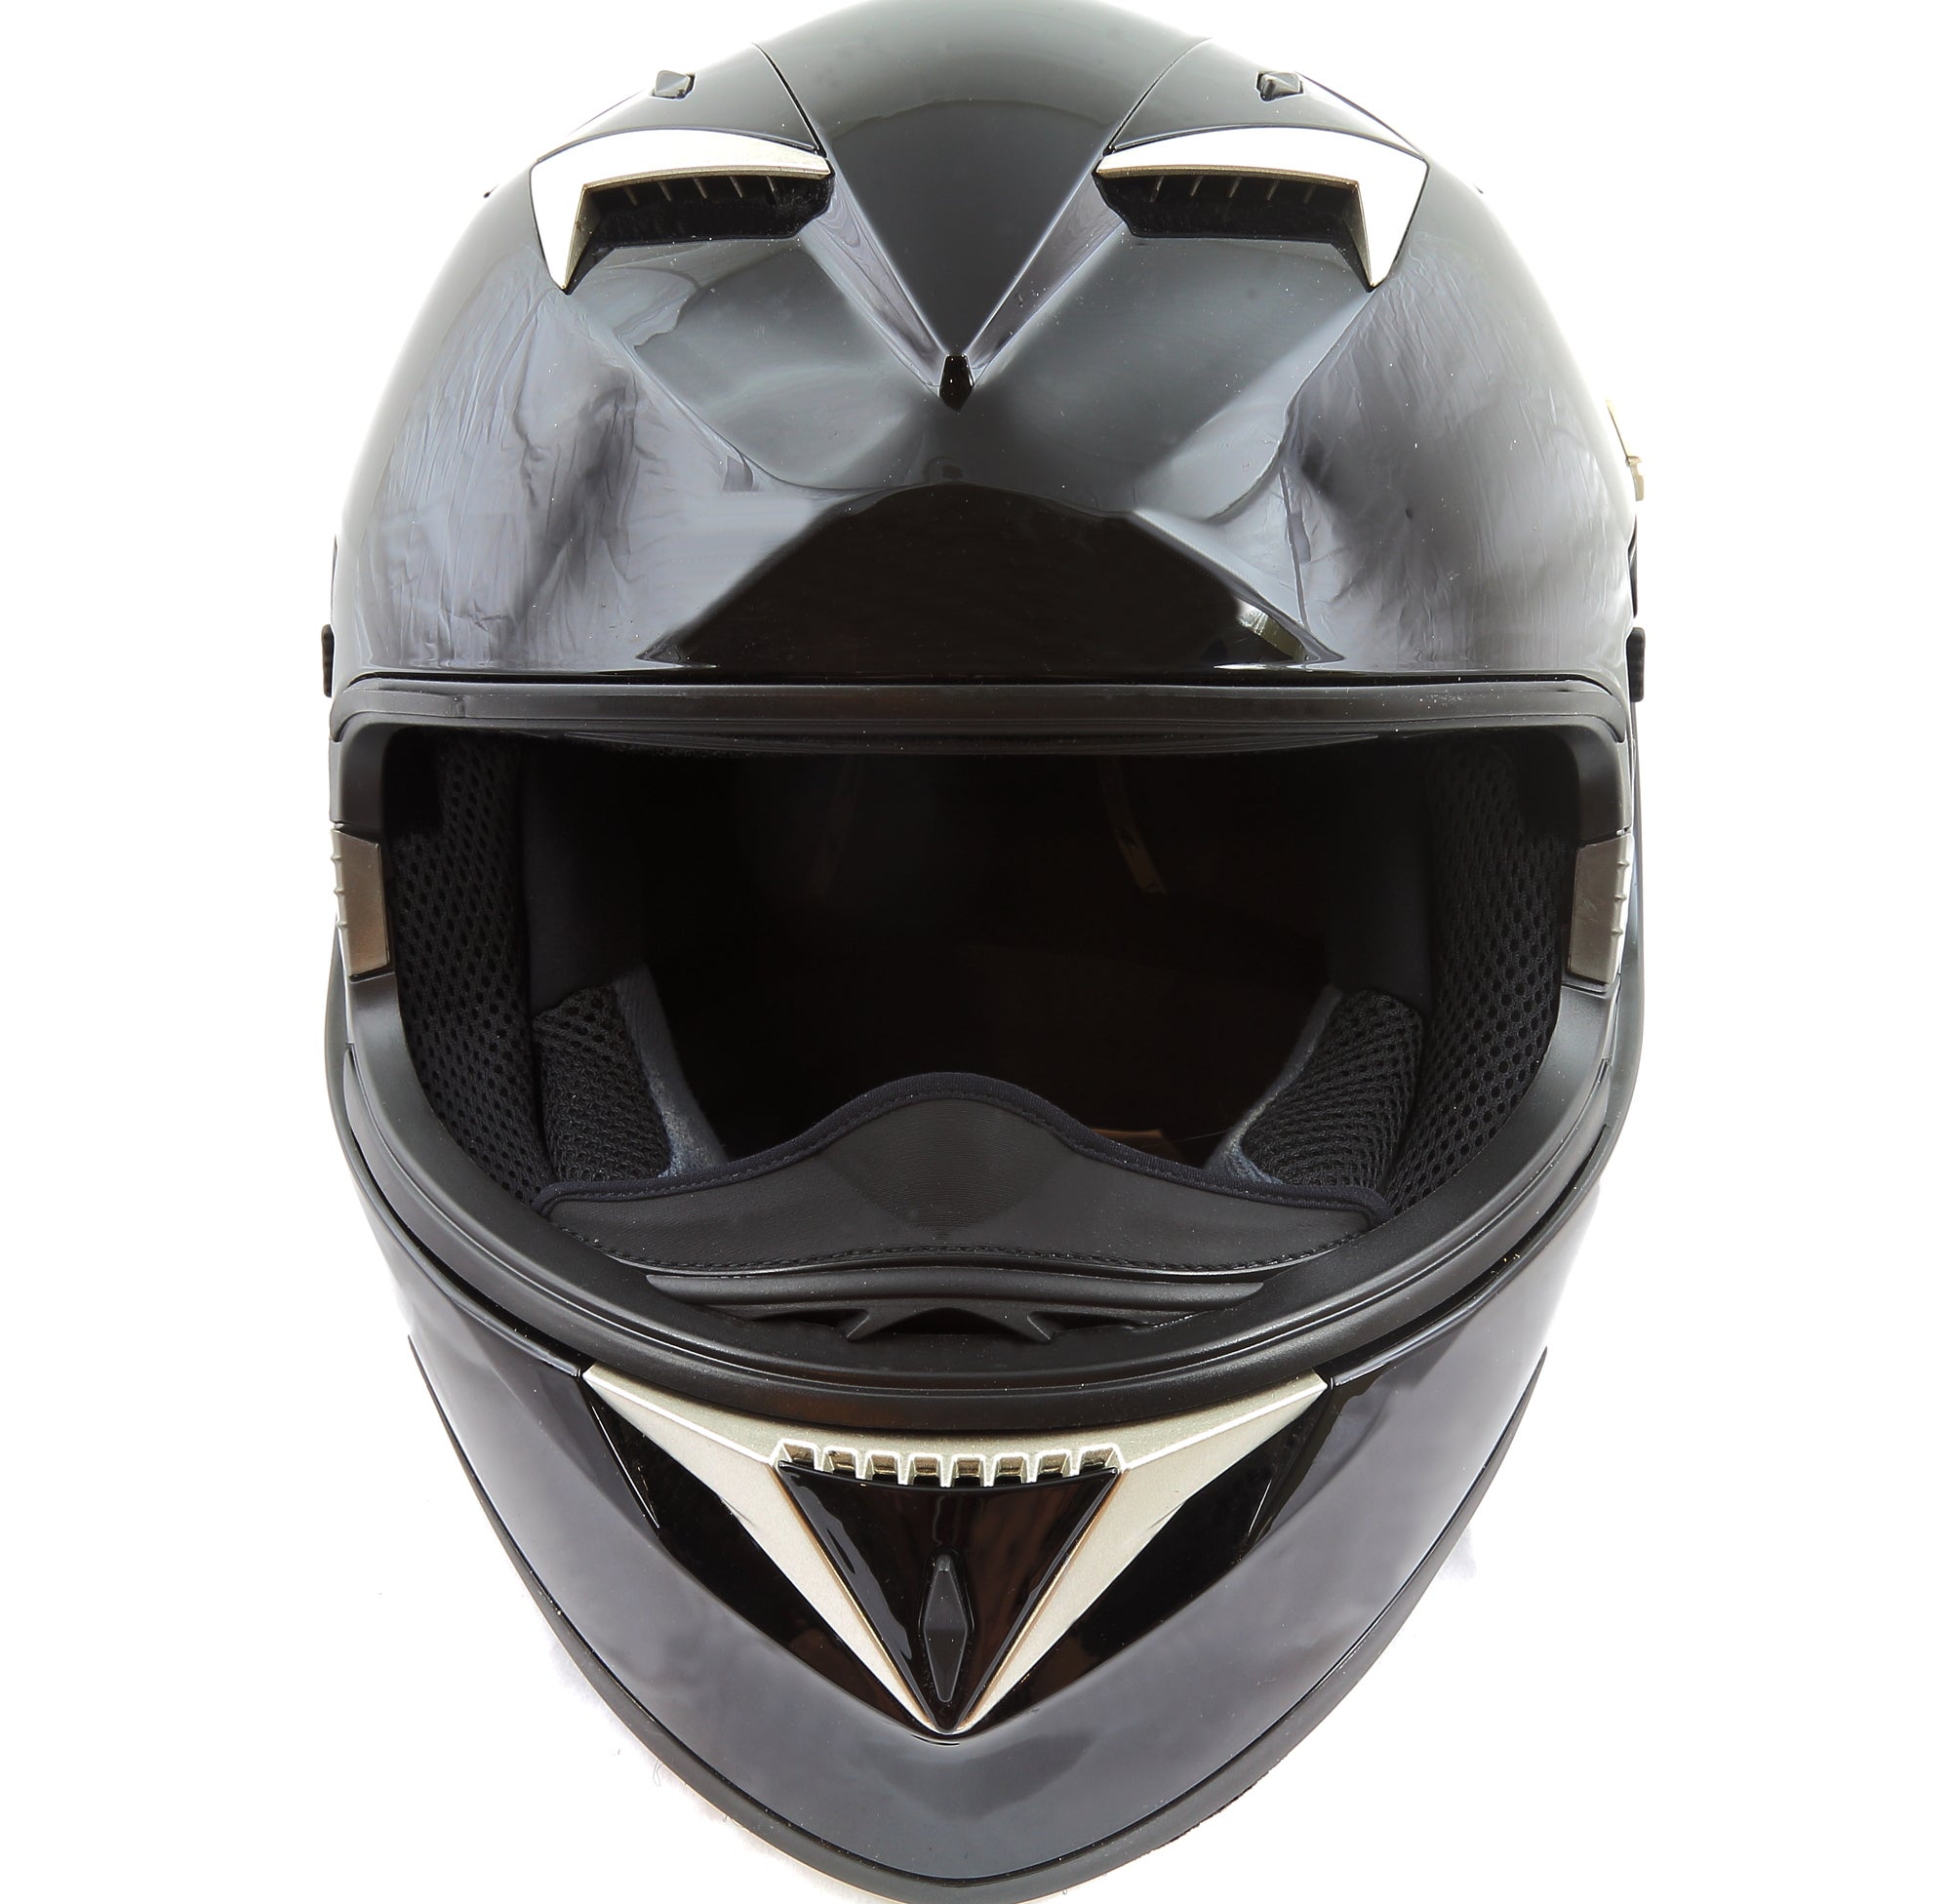 Stupefying Photos Of how to install speakers in a motorcycle helmet Gif ...